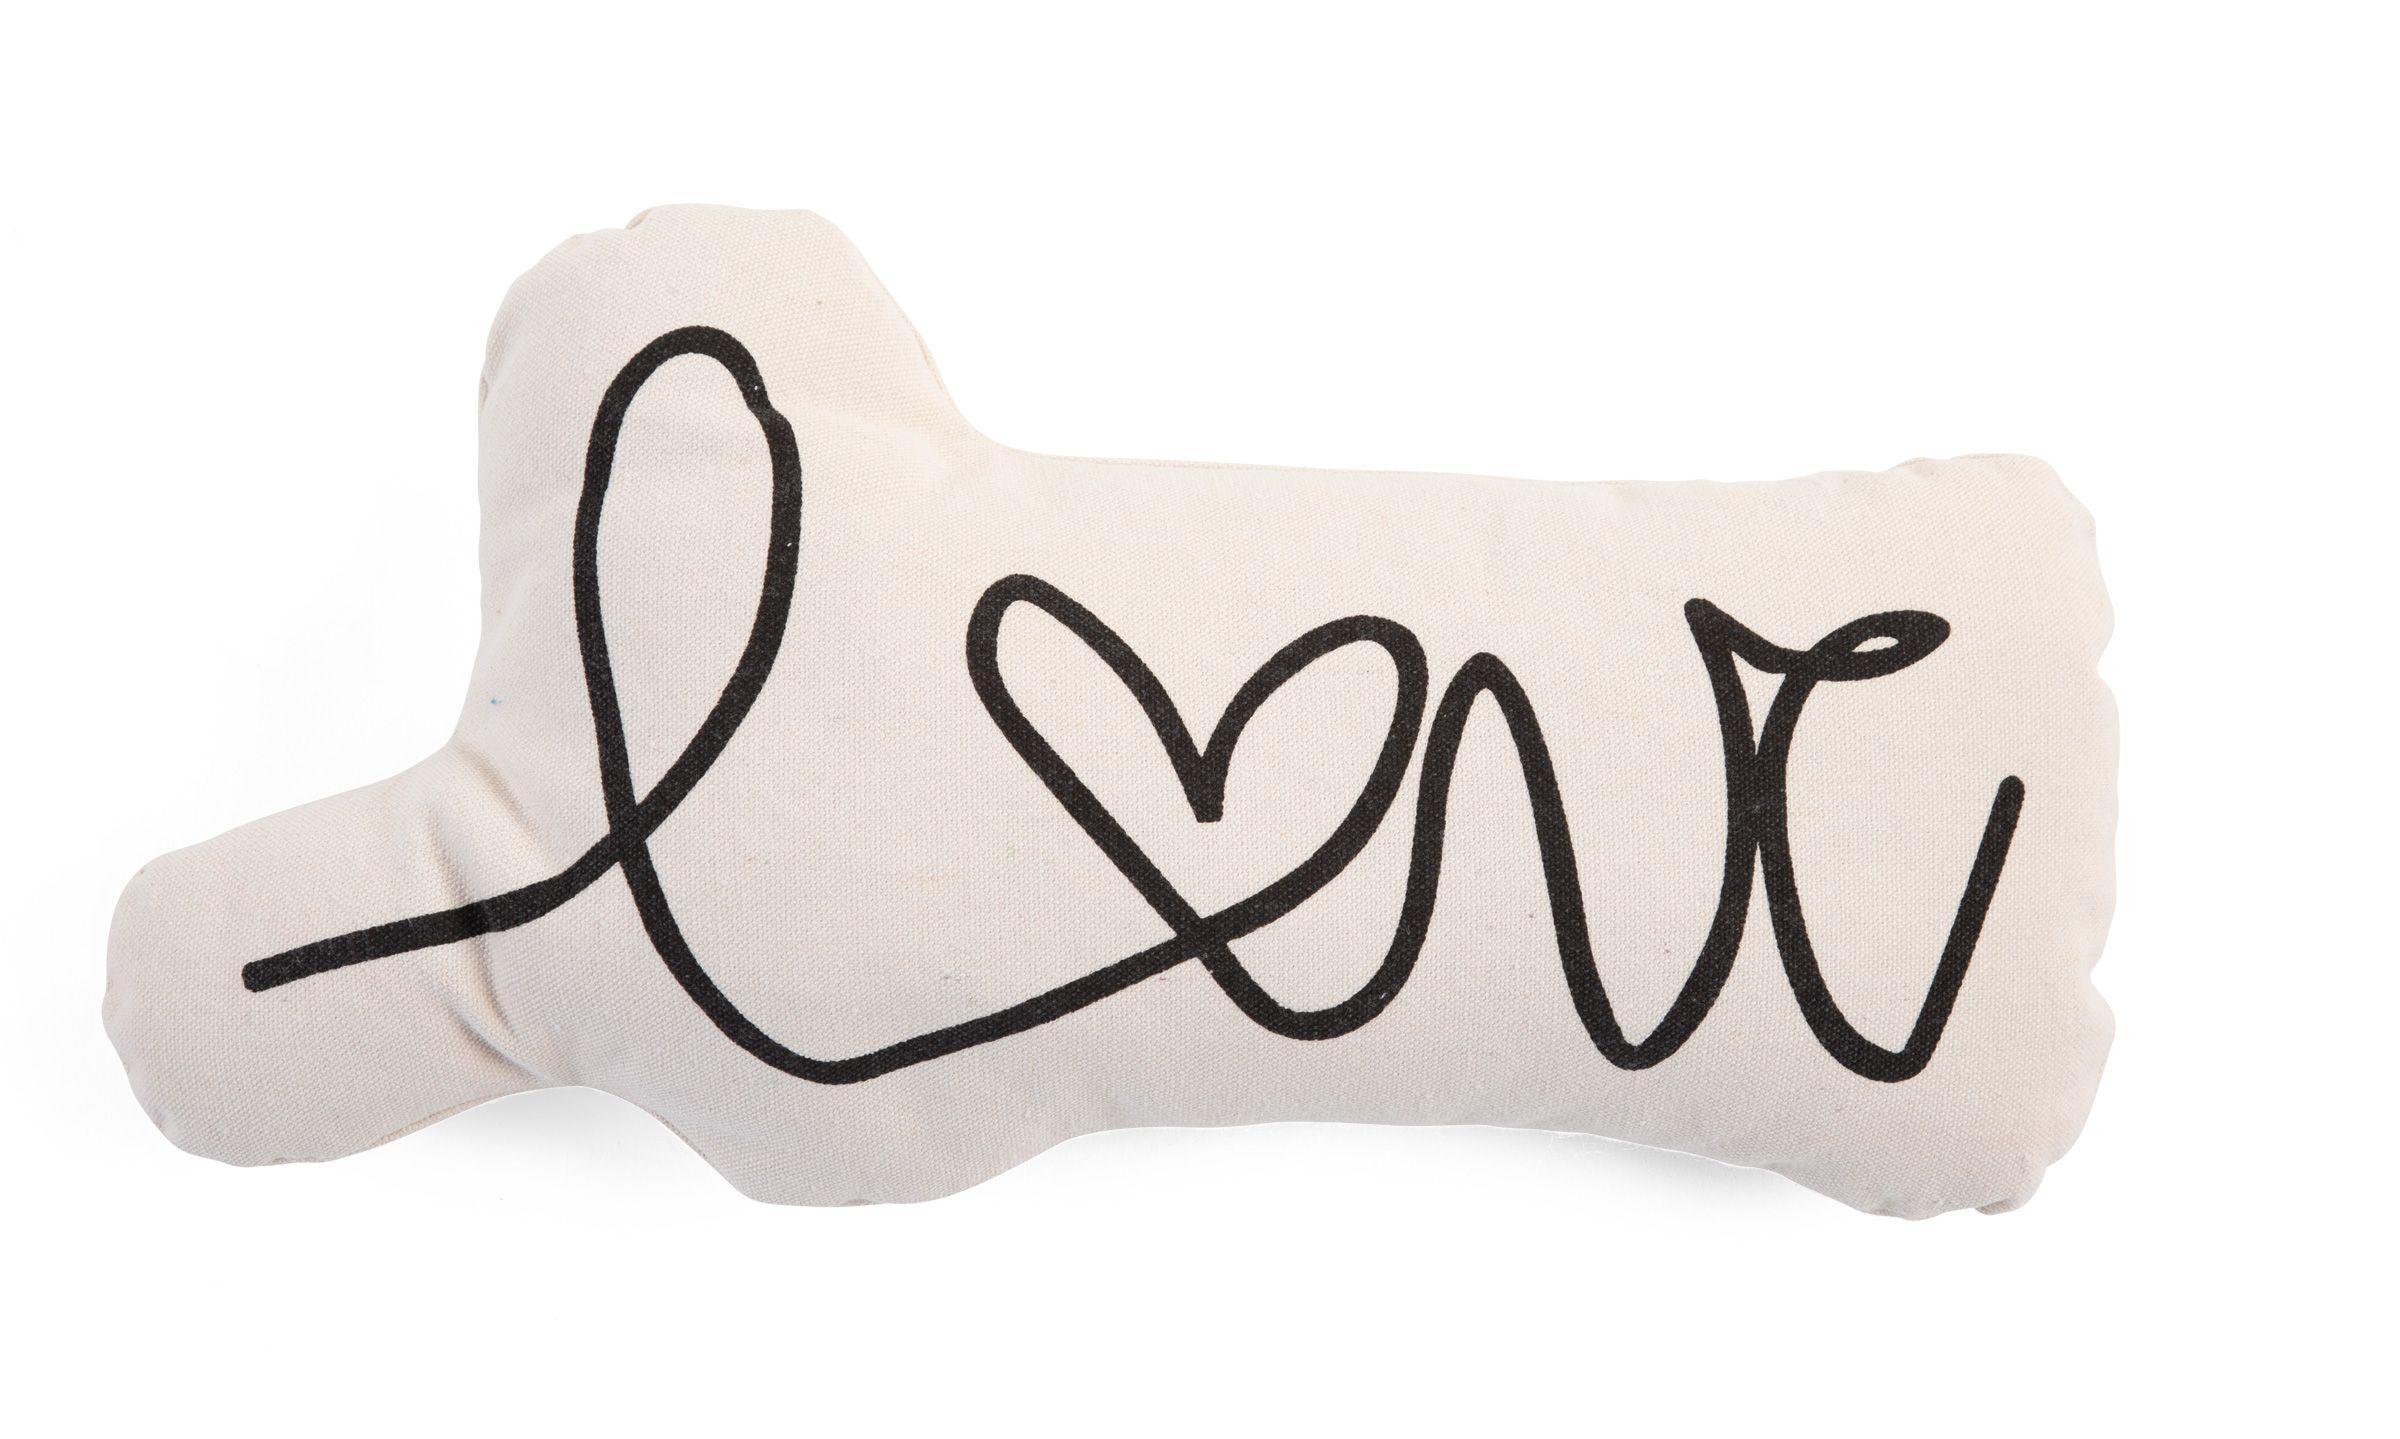 Childhome canvas cushion love letter White - Childhome